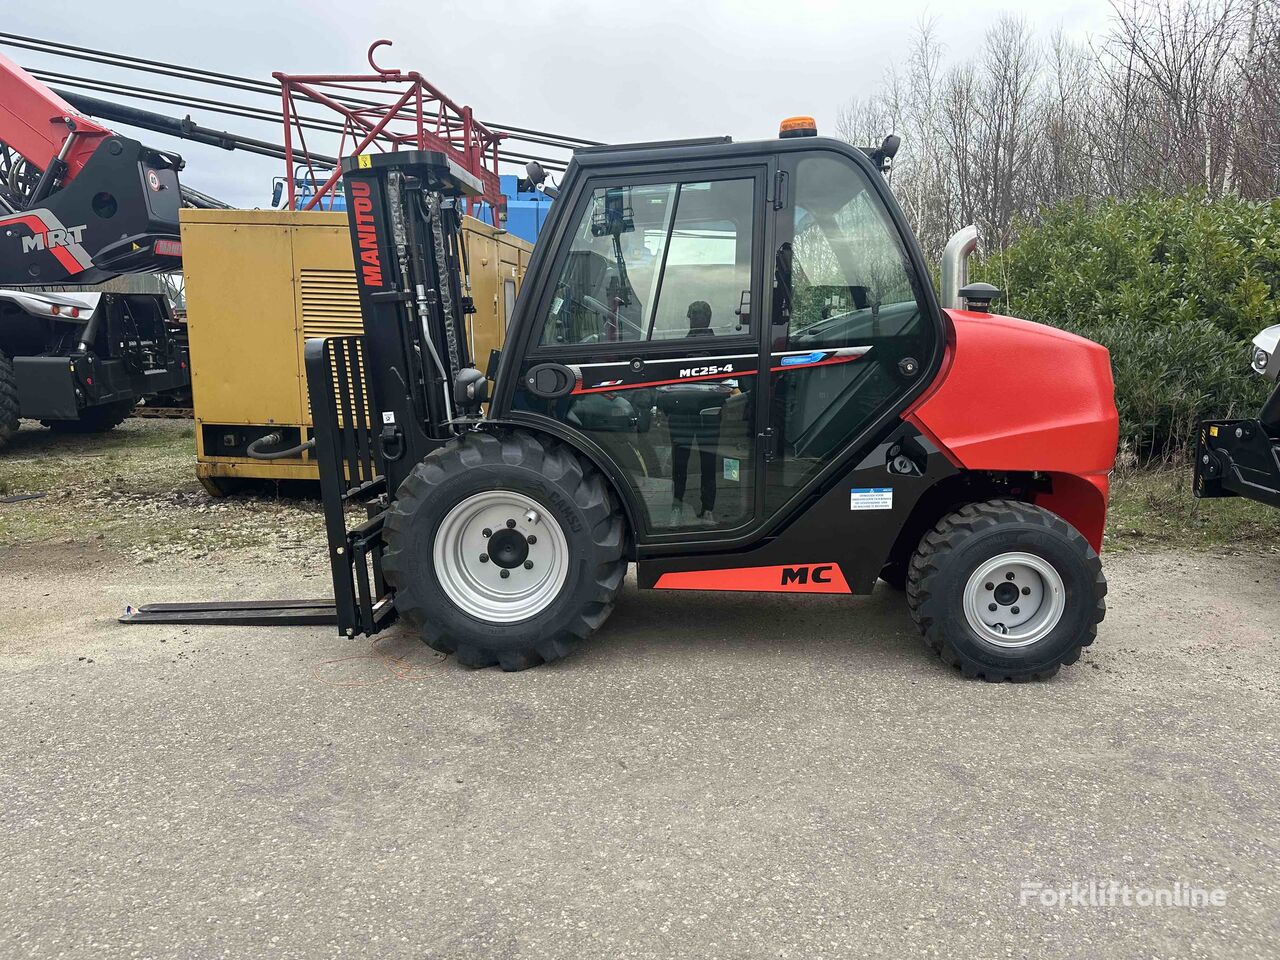 new Manitou MC25-4 high capacity forklift